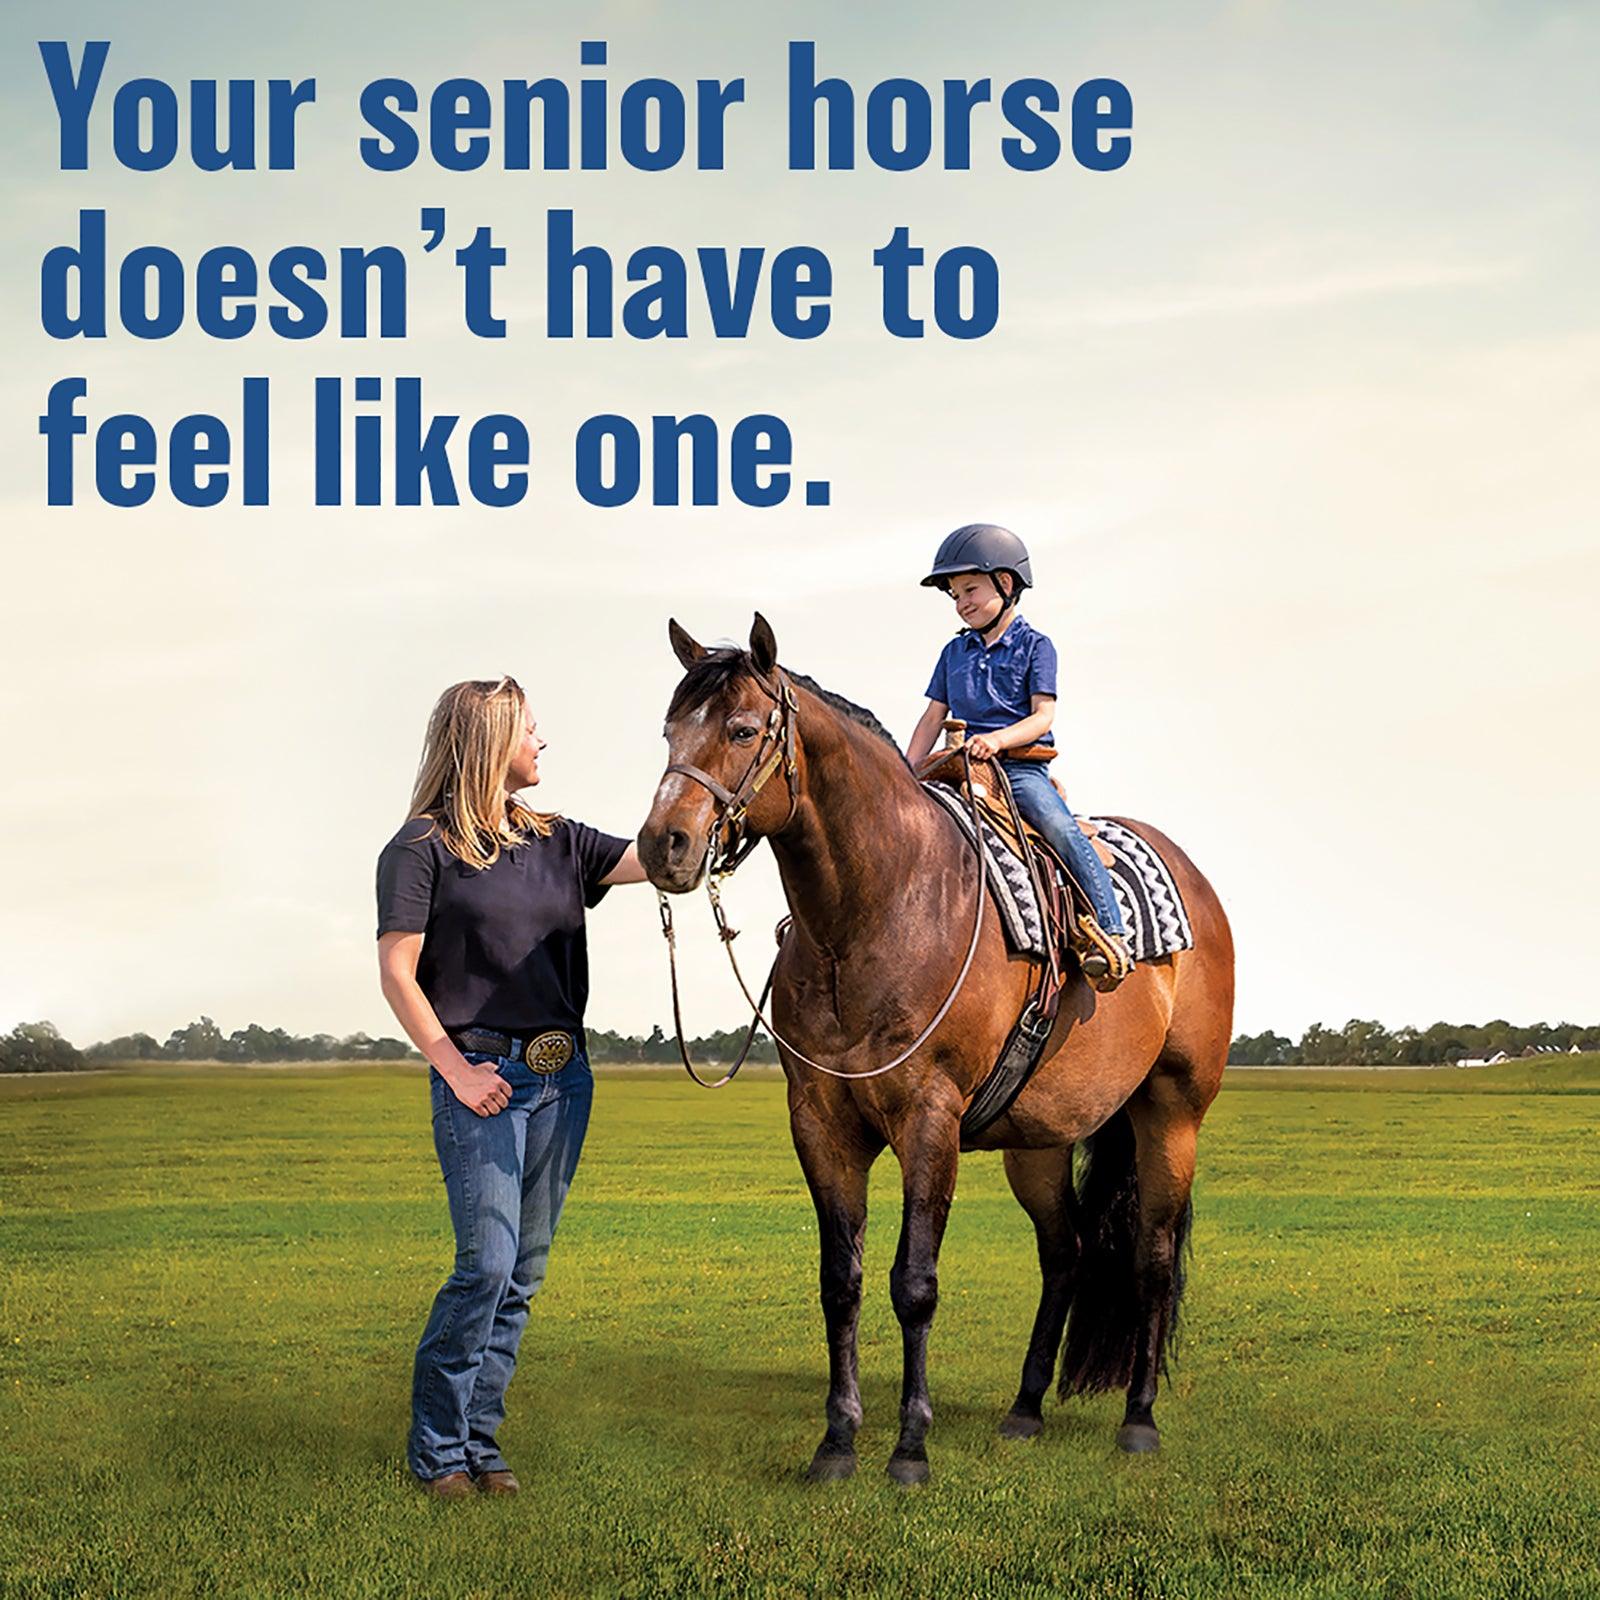 Woman holding a full size senior horse with a little boy on the saddle riding the horse. Bute-less supplement "Your senior horse doesn't have to feel like one". 